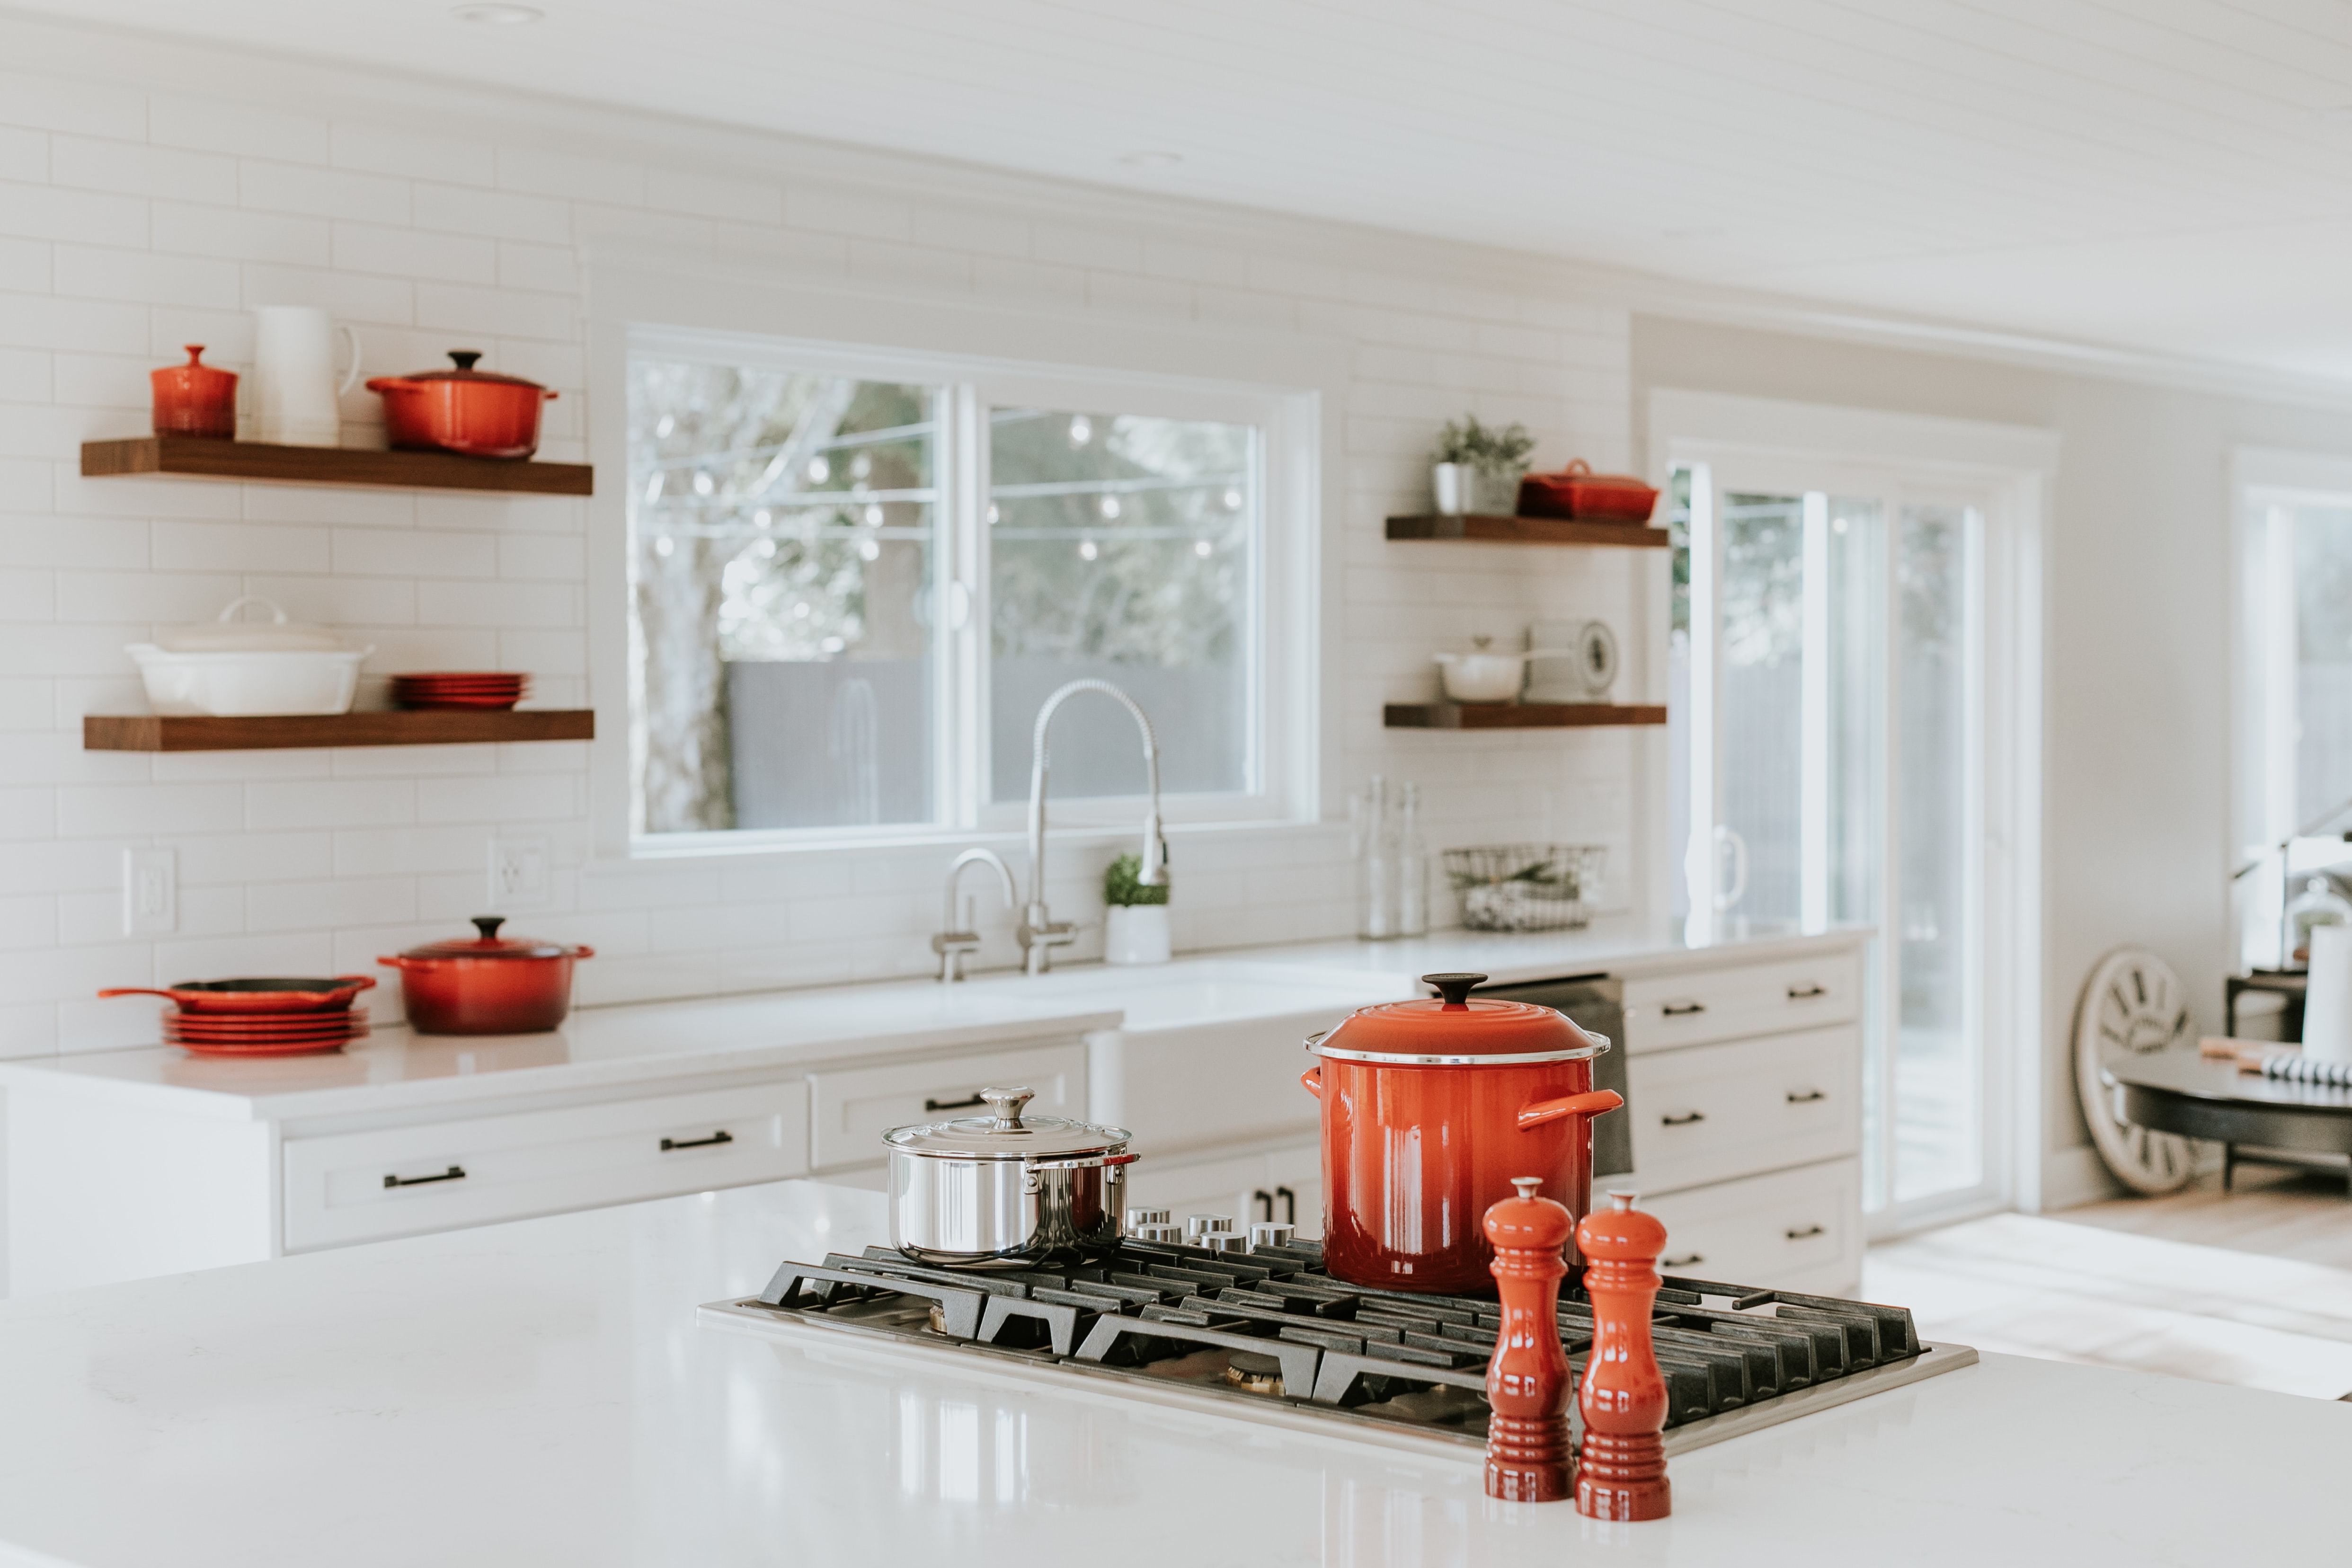 Remodeled Kitchen with Red Cookware on stovetop